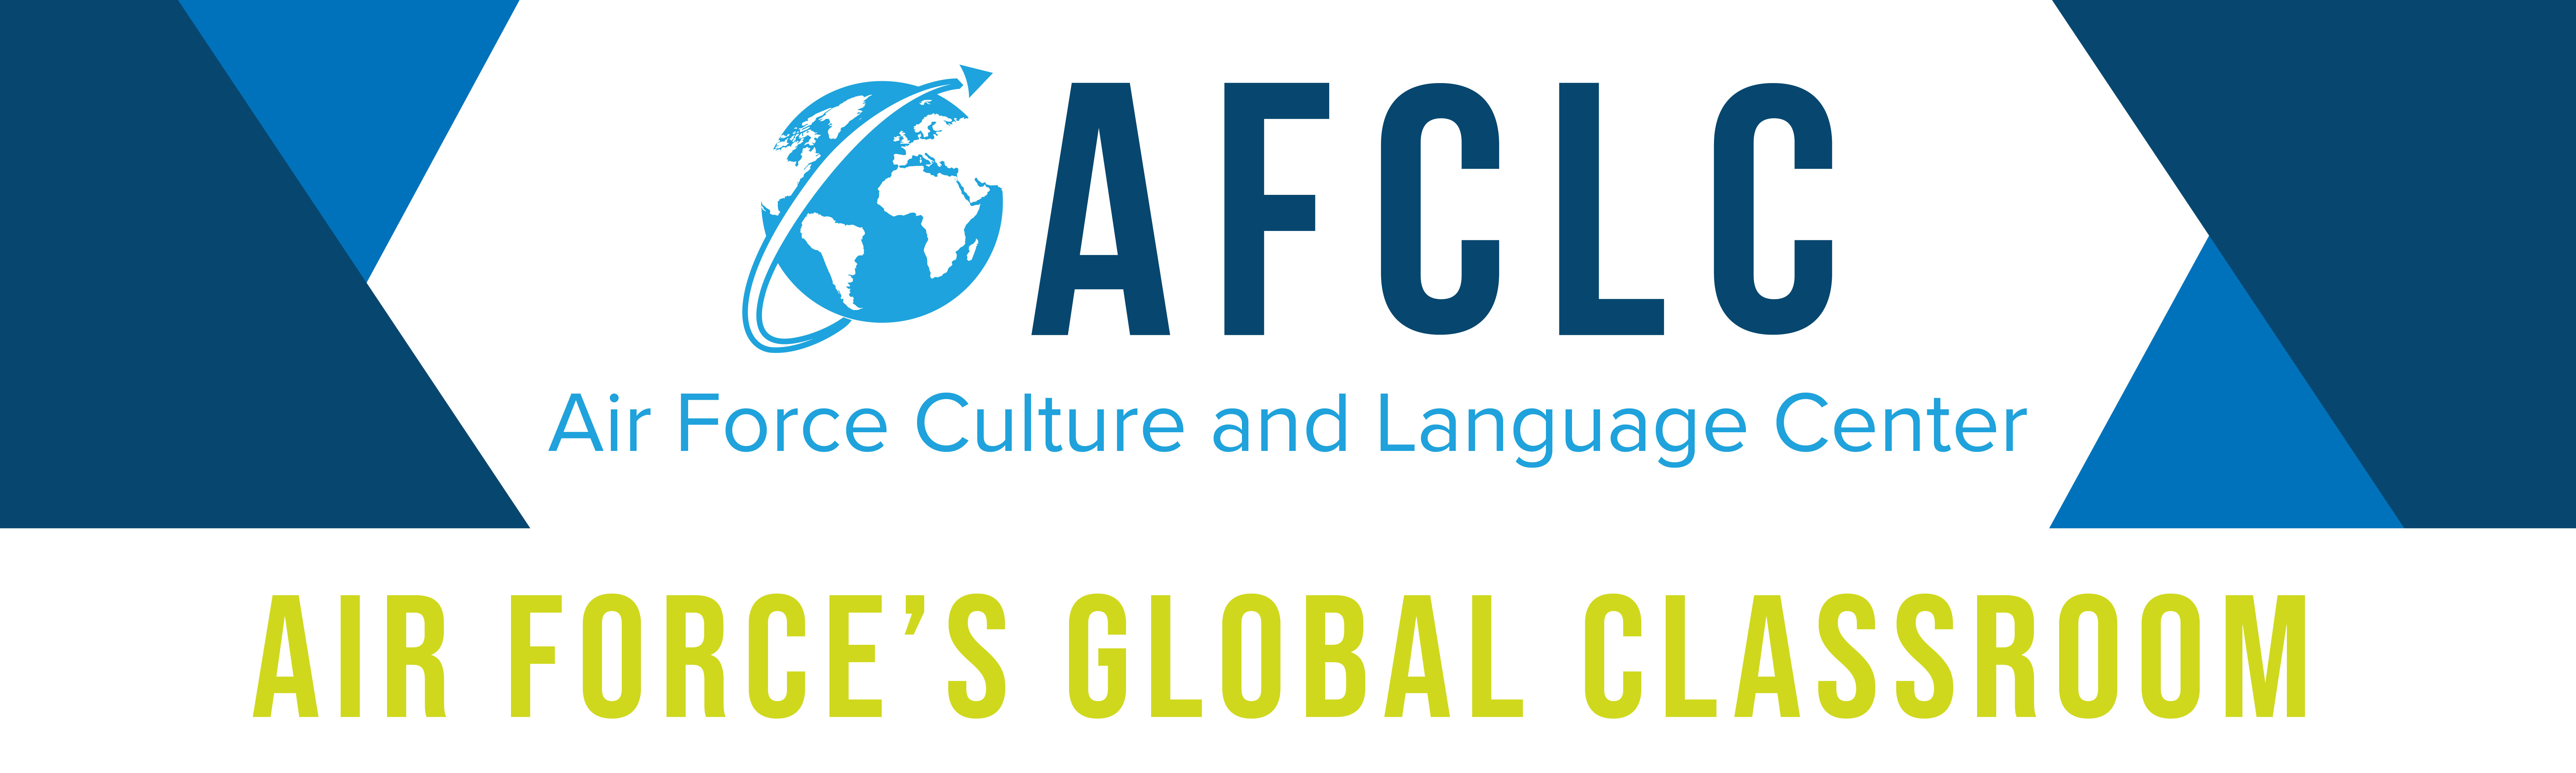 AFCLC, Air Force Culture and Language Center, Air Force's Global Classroom